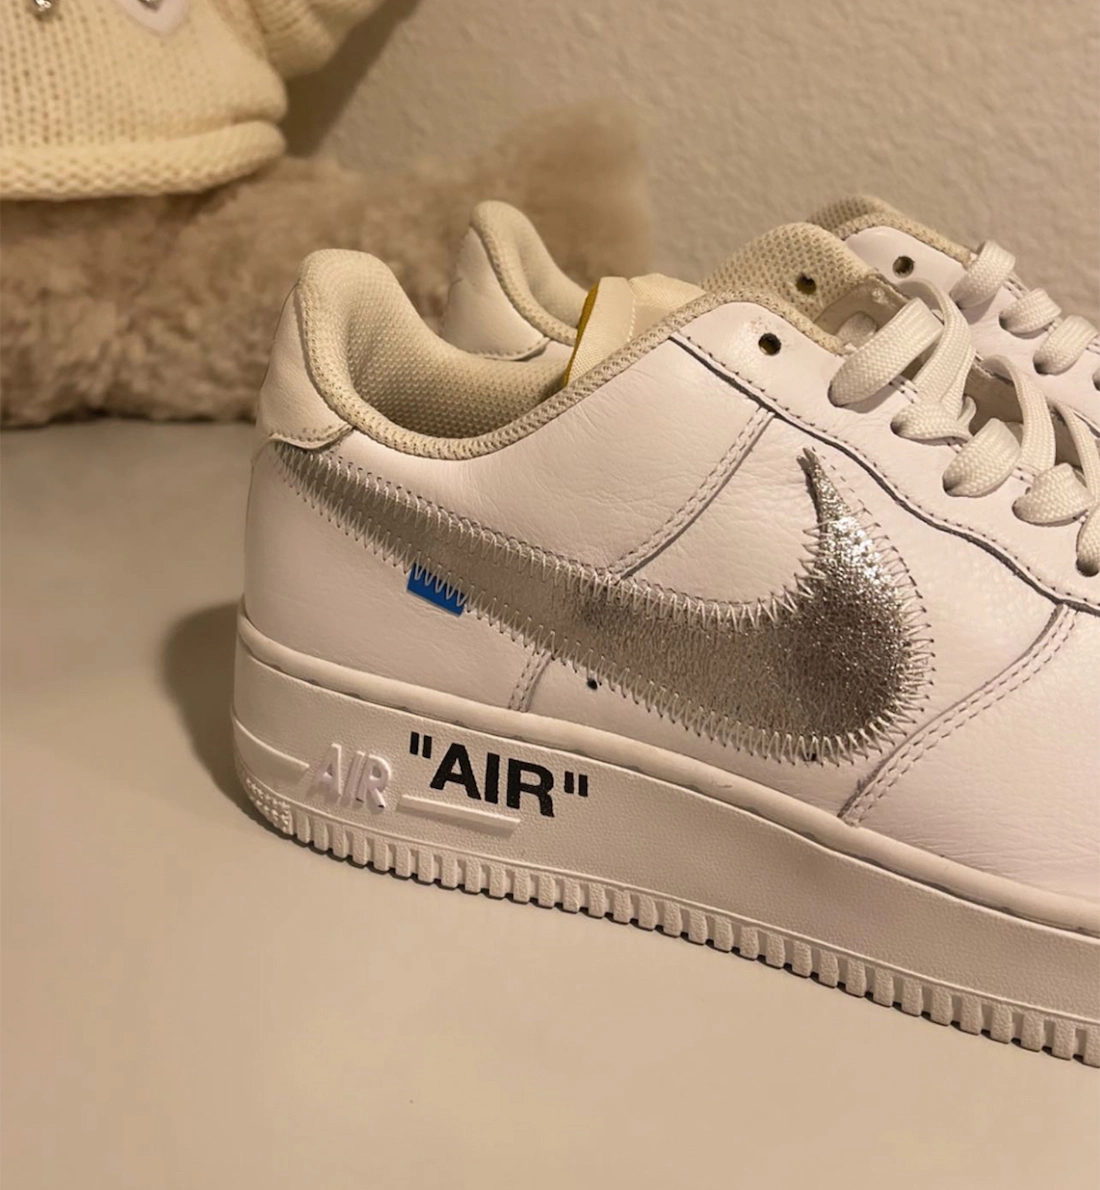 Off-White Nike Air Force 1 Sample